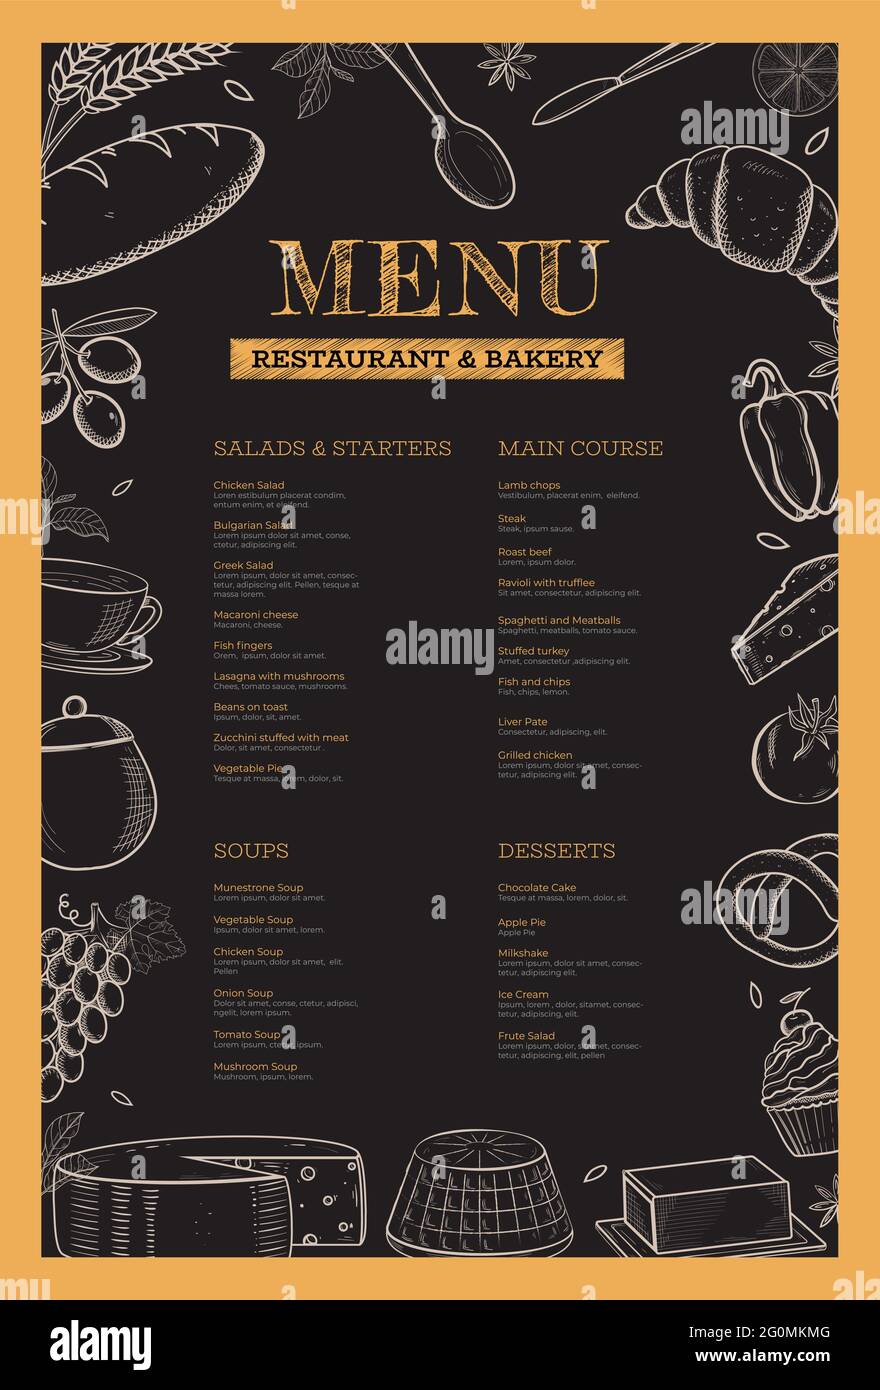 Restaurant and bakery menu template. Hand drawn vector food illustration on chalkboard black background. Bakery goods, cheese, fruits, vegetables. Stock Vector